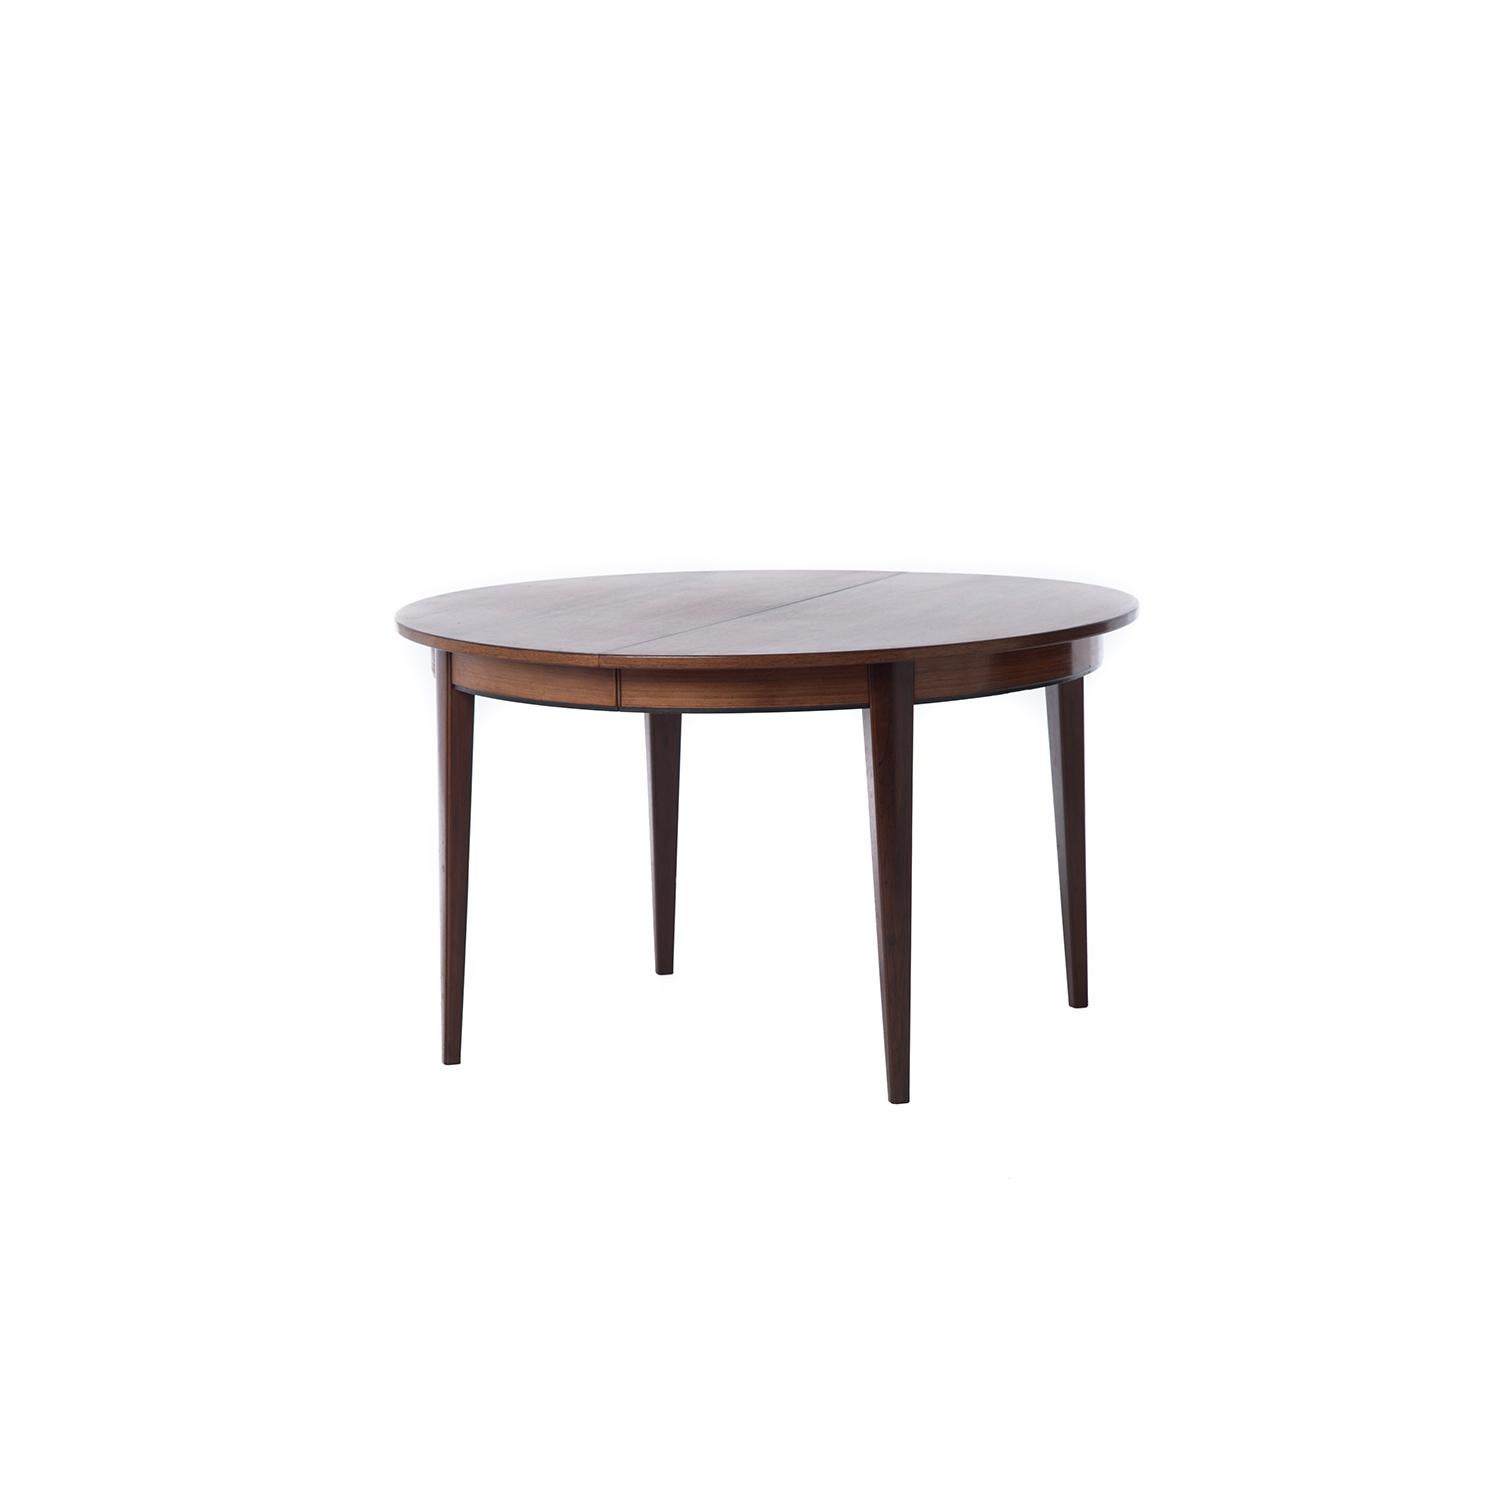 This beautiful and sturdy Danish modern original table is made from highly figured old growth rosewood which has an updated (new) lacquer finish for ease of use. This table comfortably seats four in its smallest iteration, 6 with one leaf and 8 (or